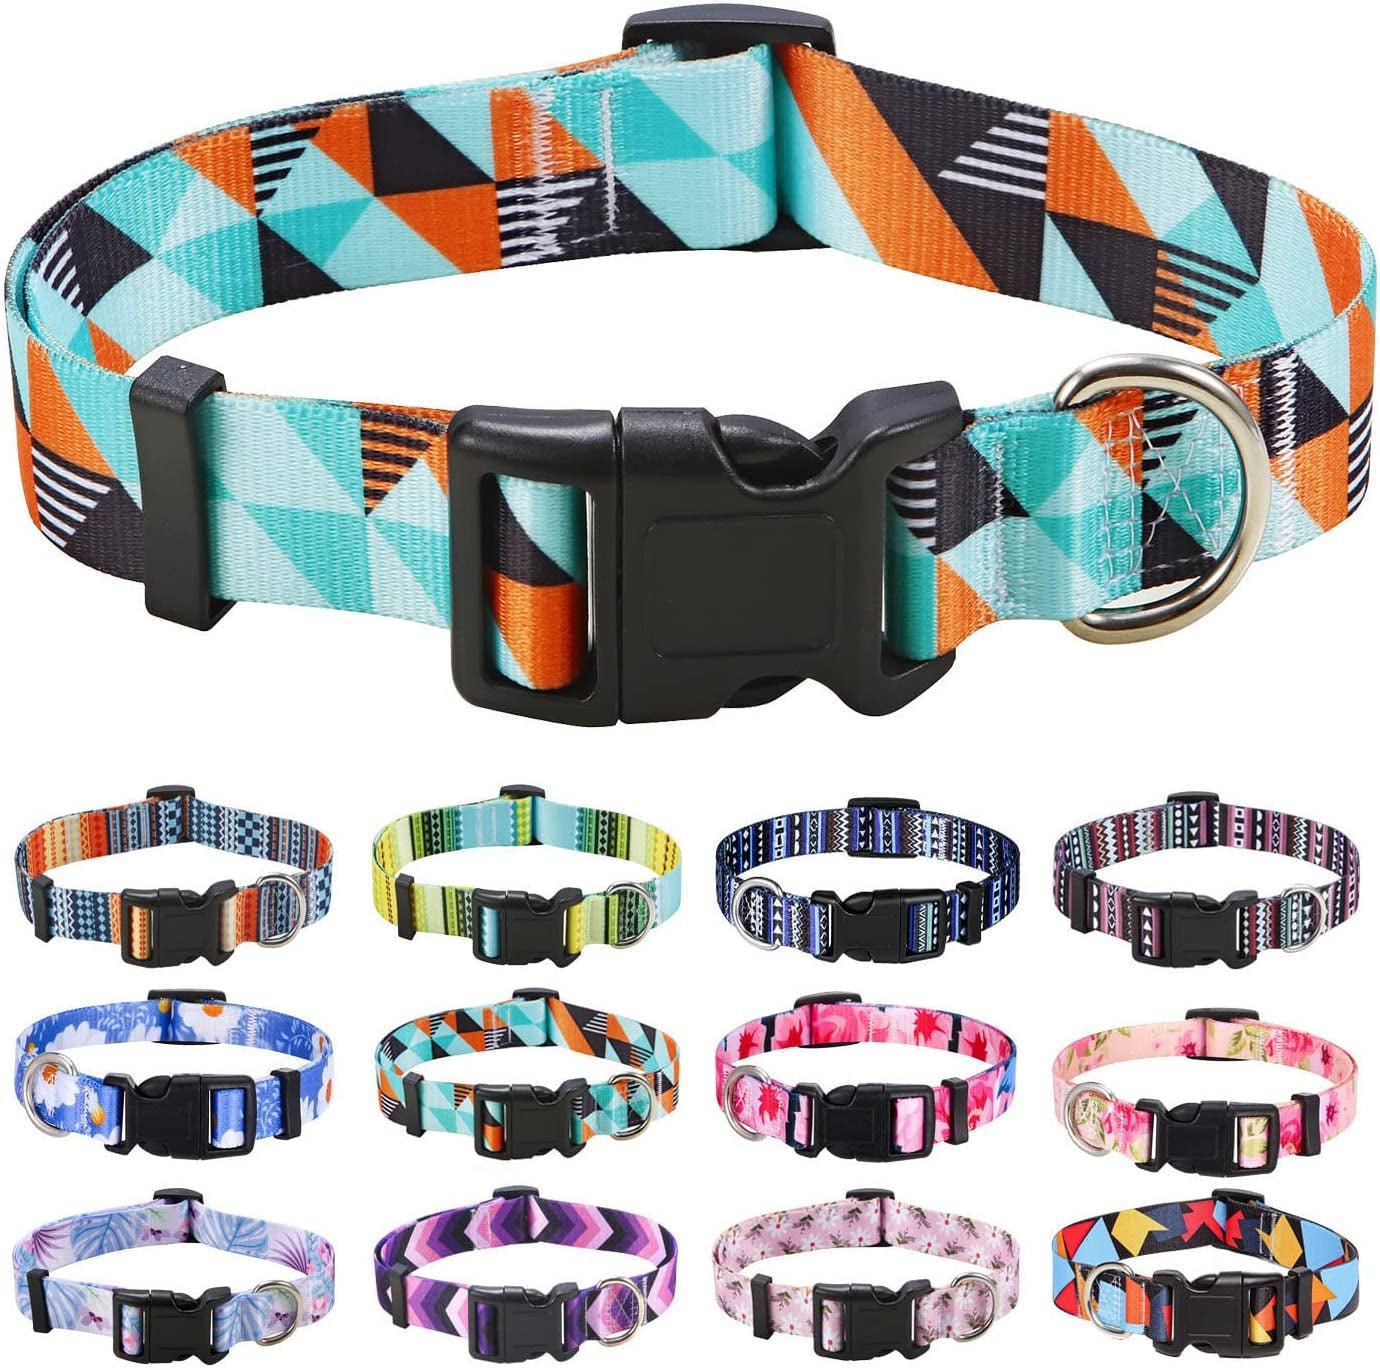 Dog Collar with Bohemia Floral Tribal Geometric Patterns - Soft Ethnic Style Collar Adjustable for Small Medium Large Dogs（Geometry,S） - PETGS